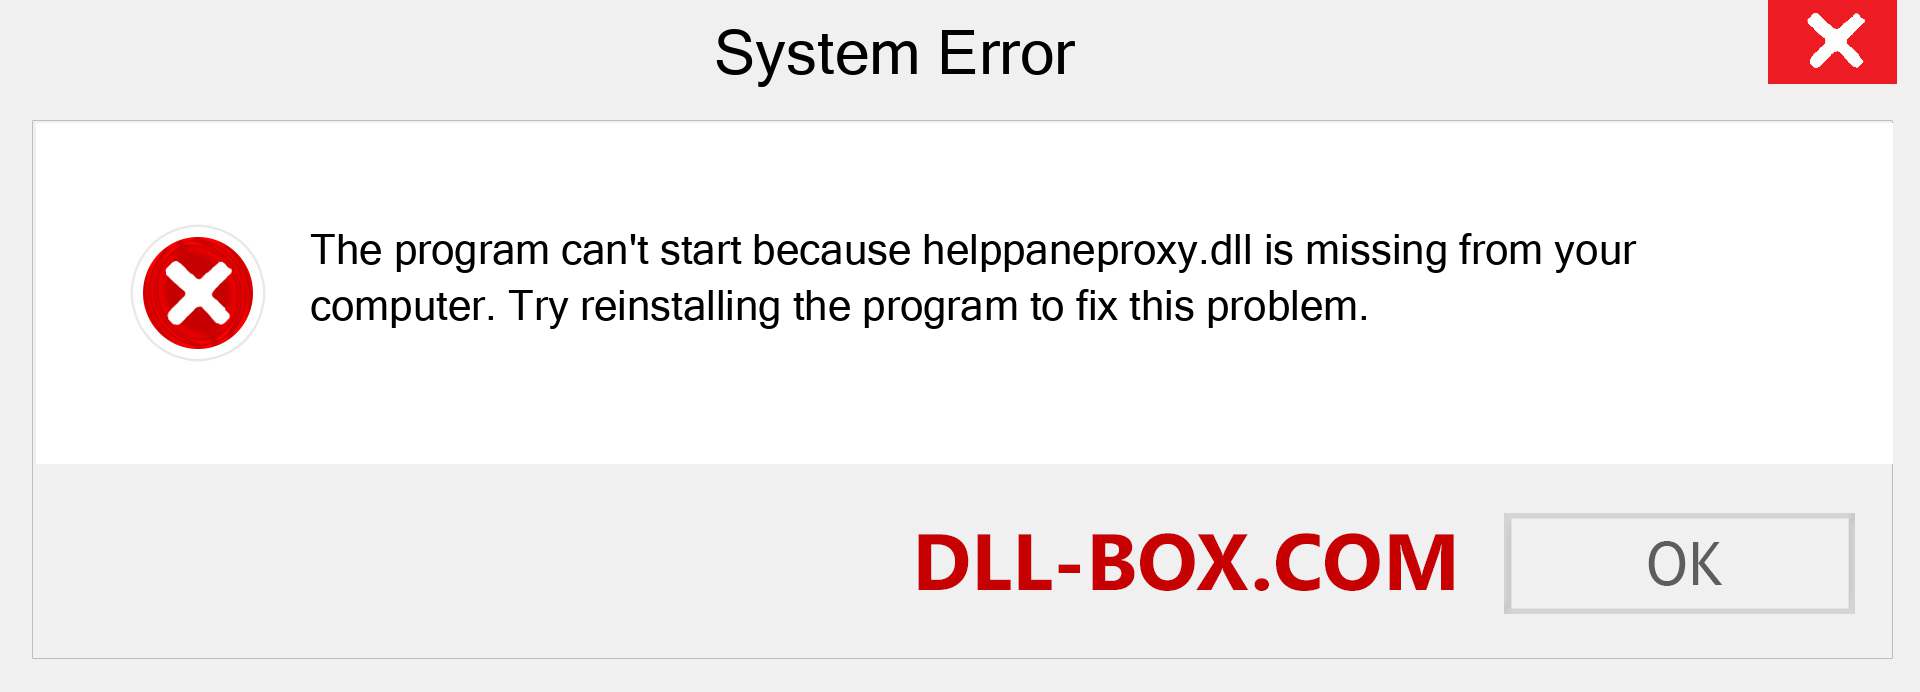  helppaneproxy.dll file is missing?. Download for Windows 7, 8, 10 - Fix  helppaneproxy dll Missing Error on Windows, photos, images